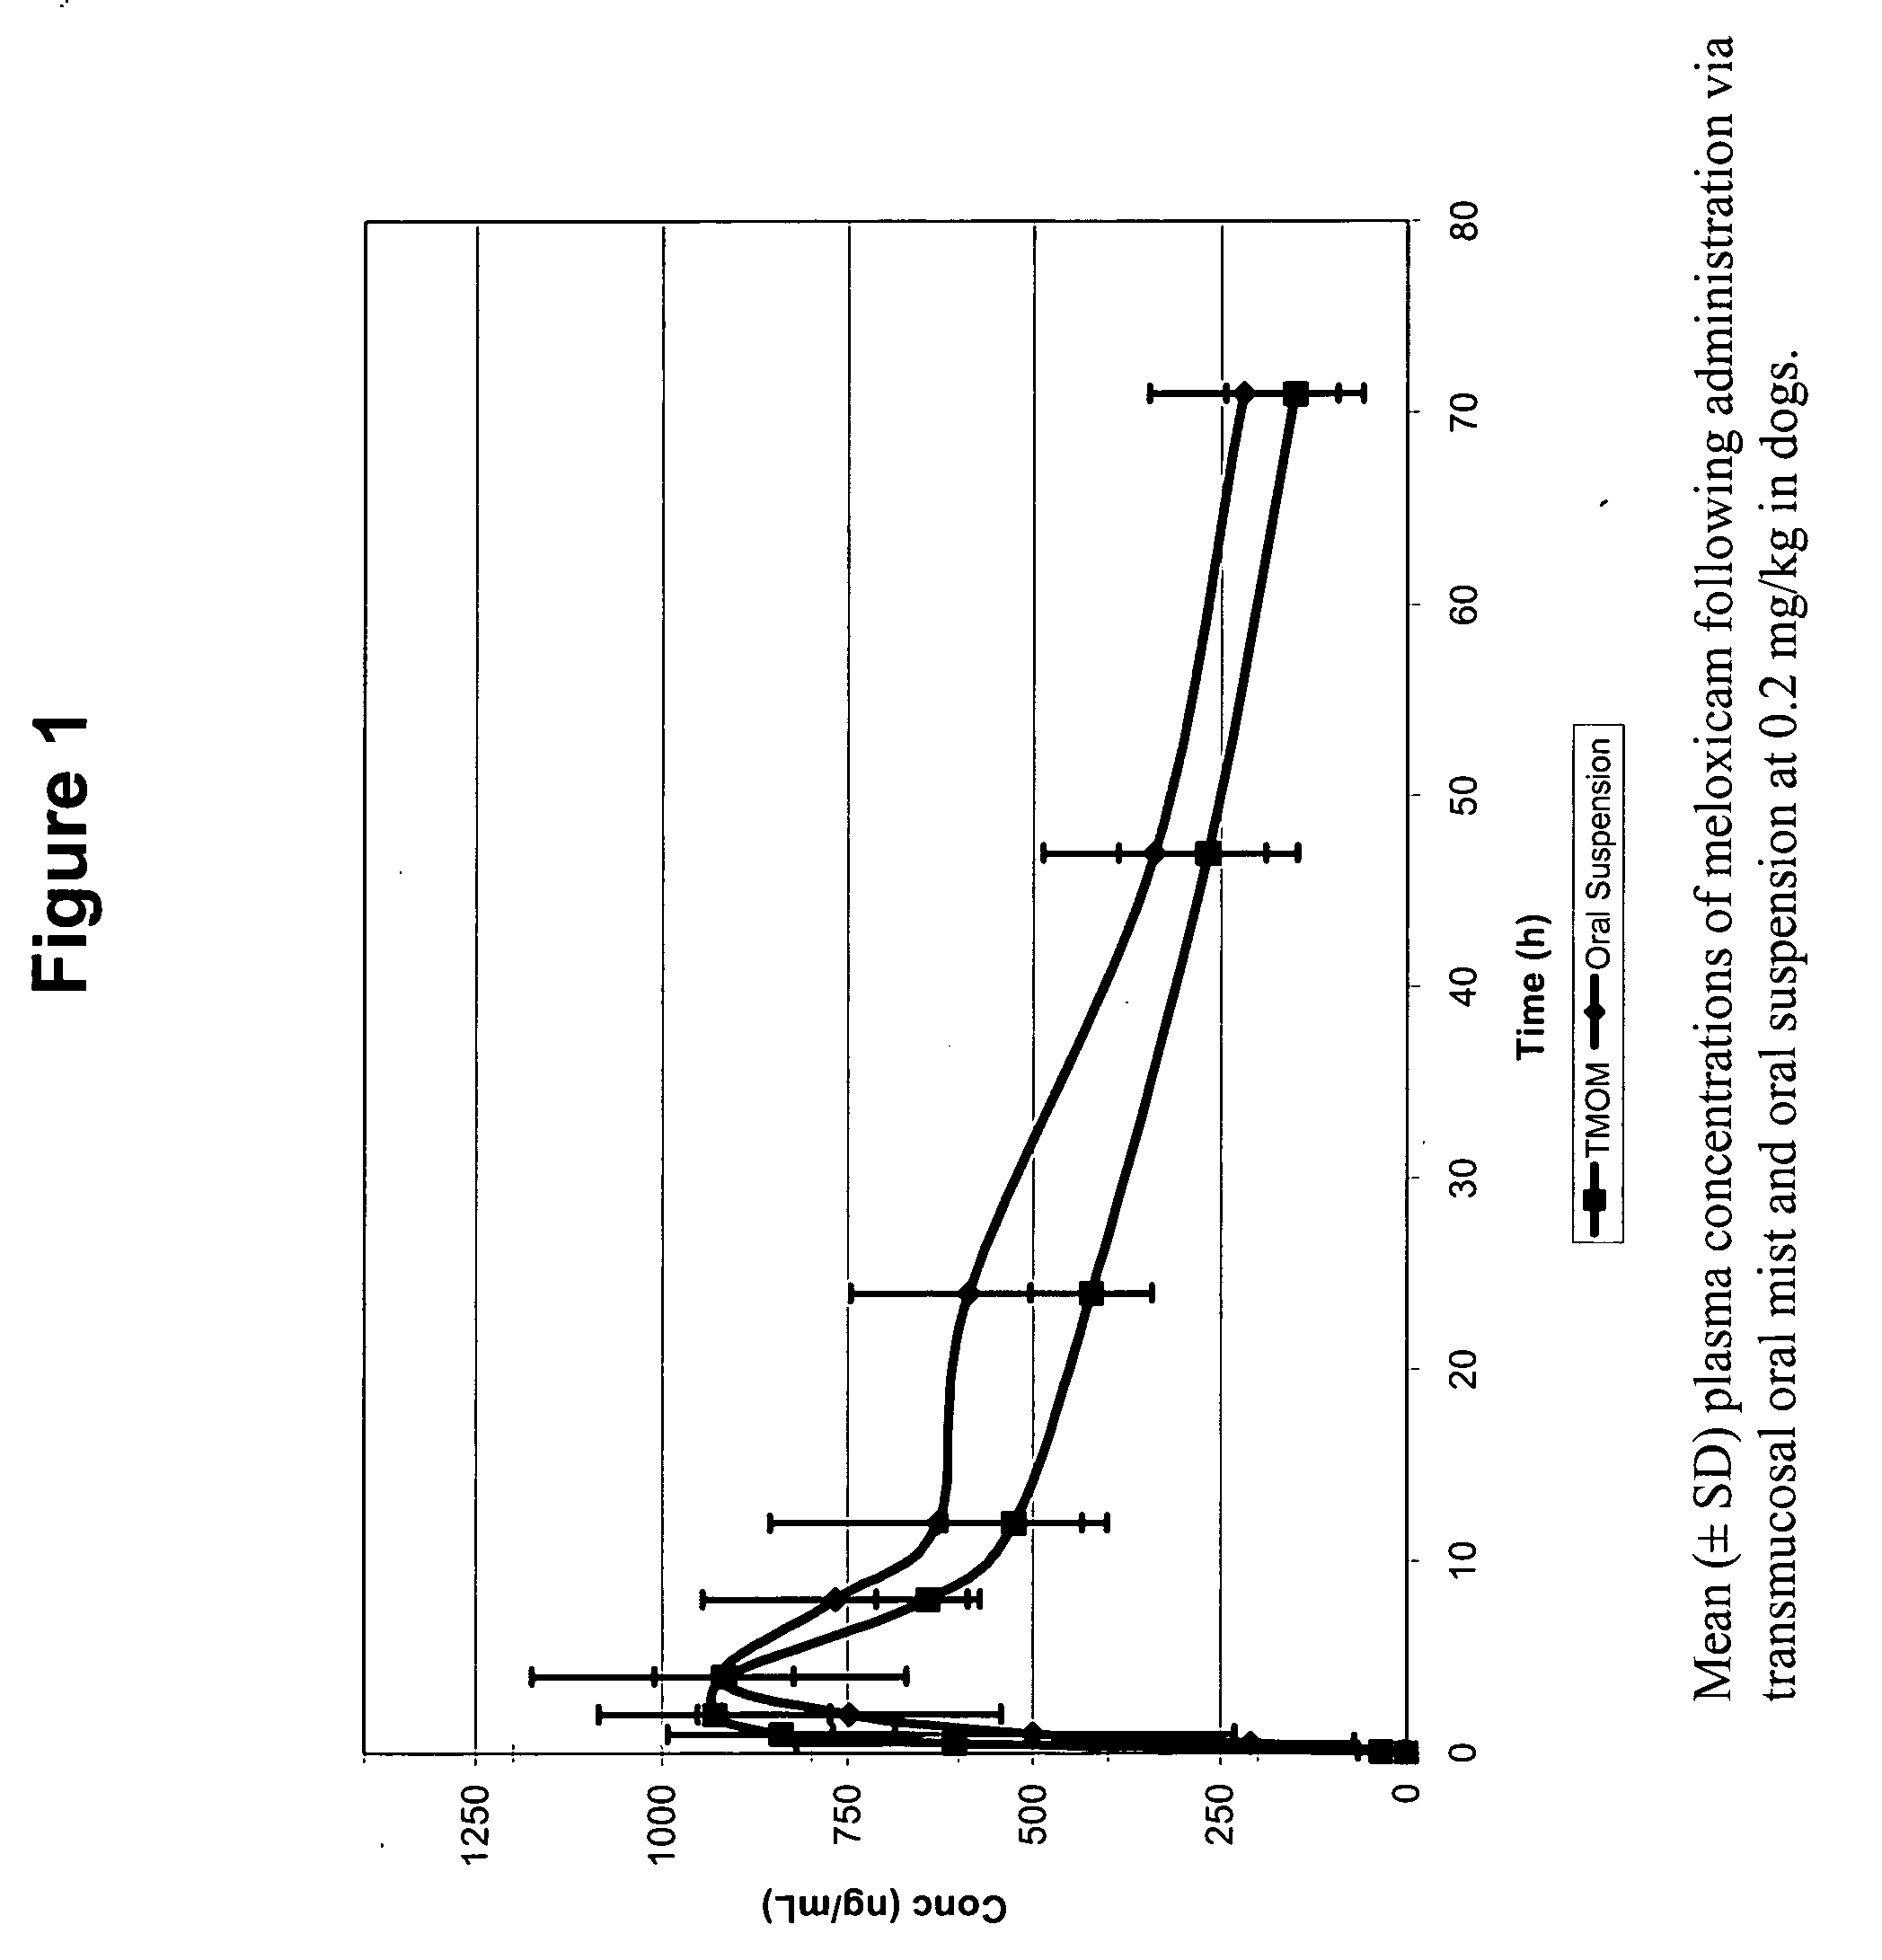 Transmucosal administration of drug compositions for treating and preventing disorders in animals